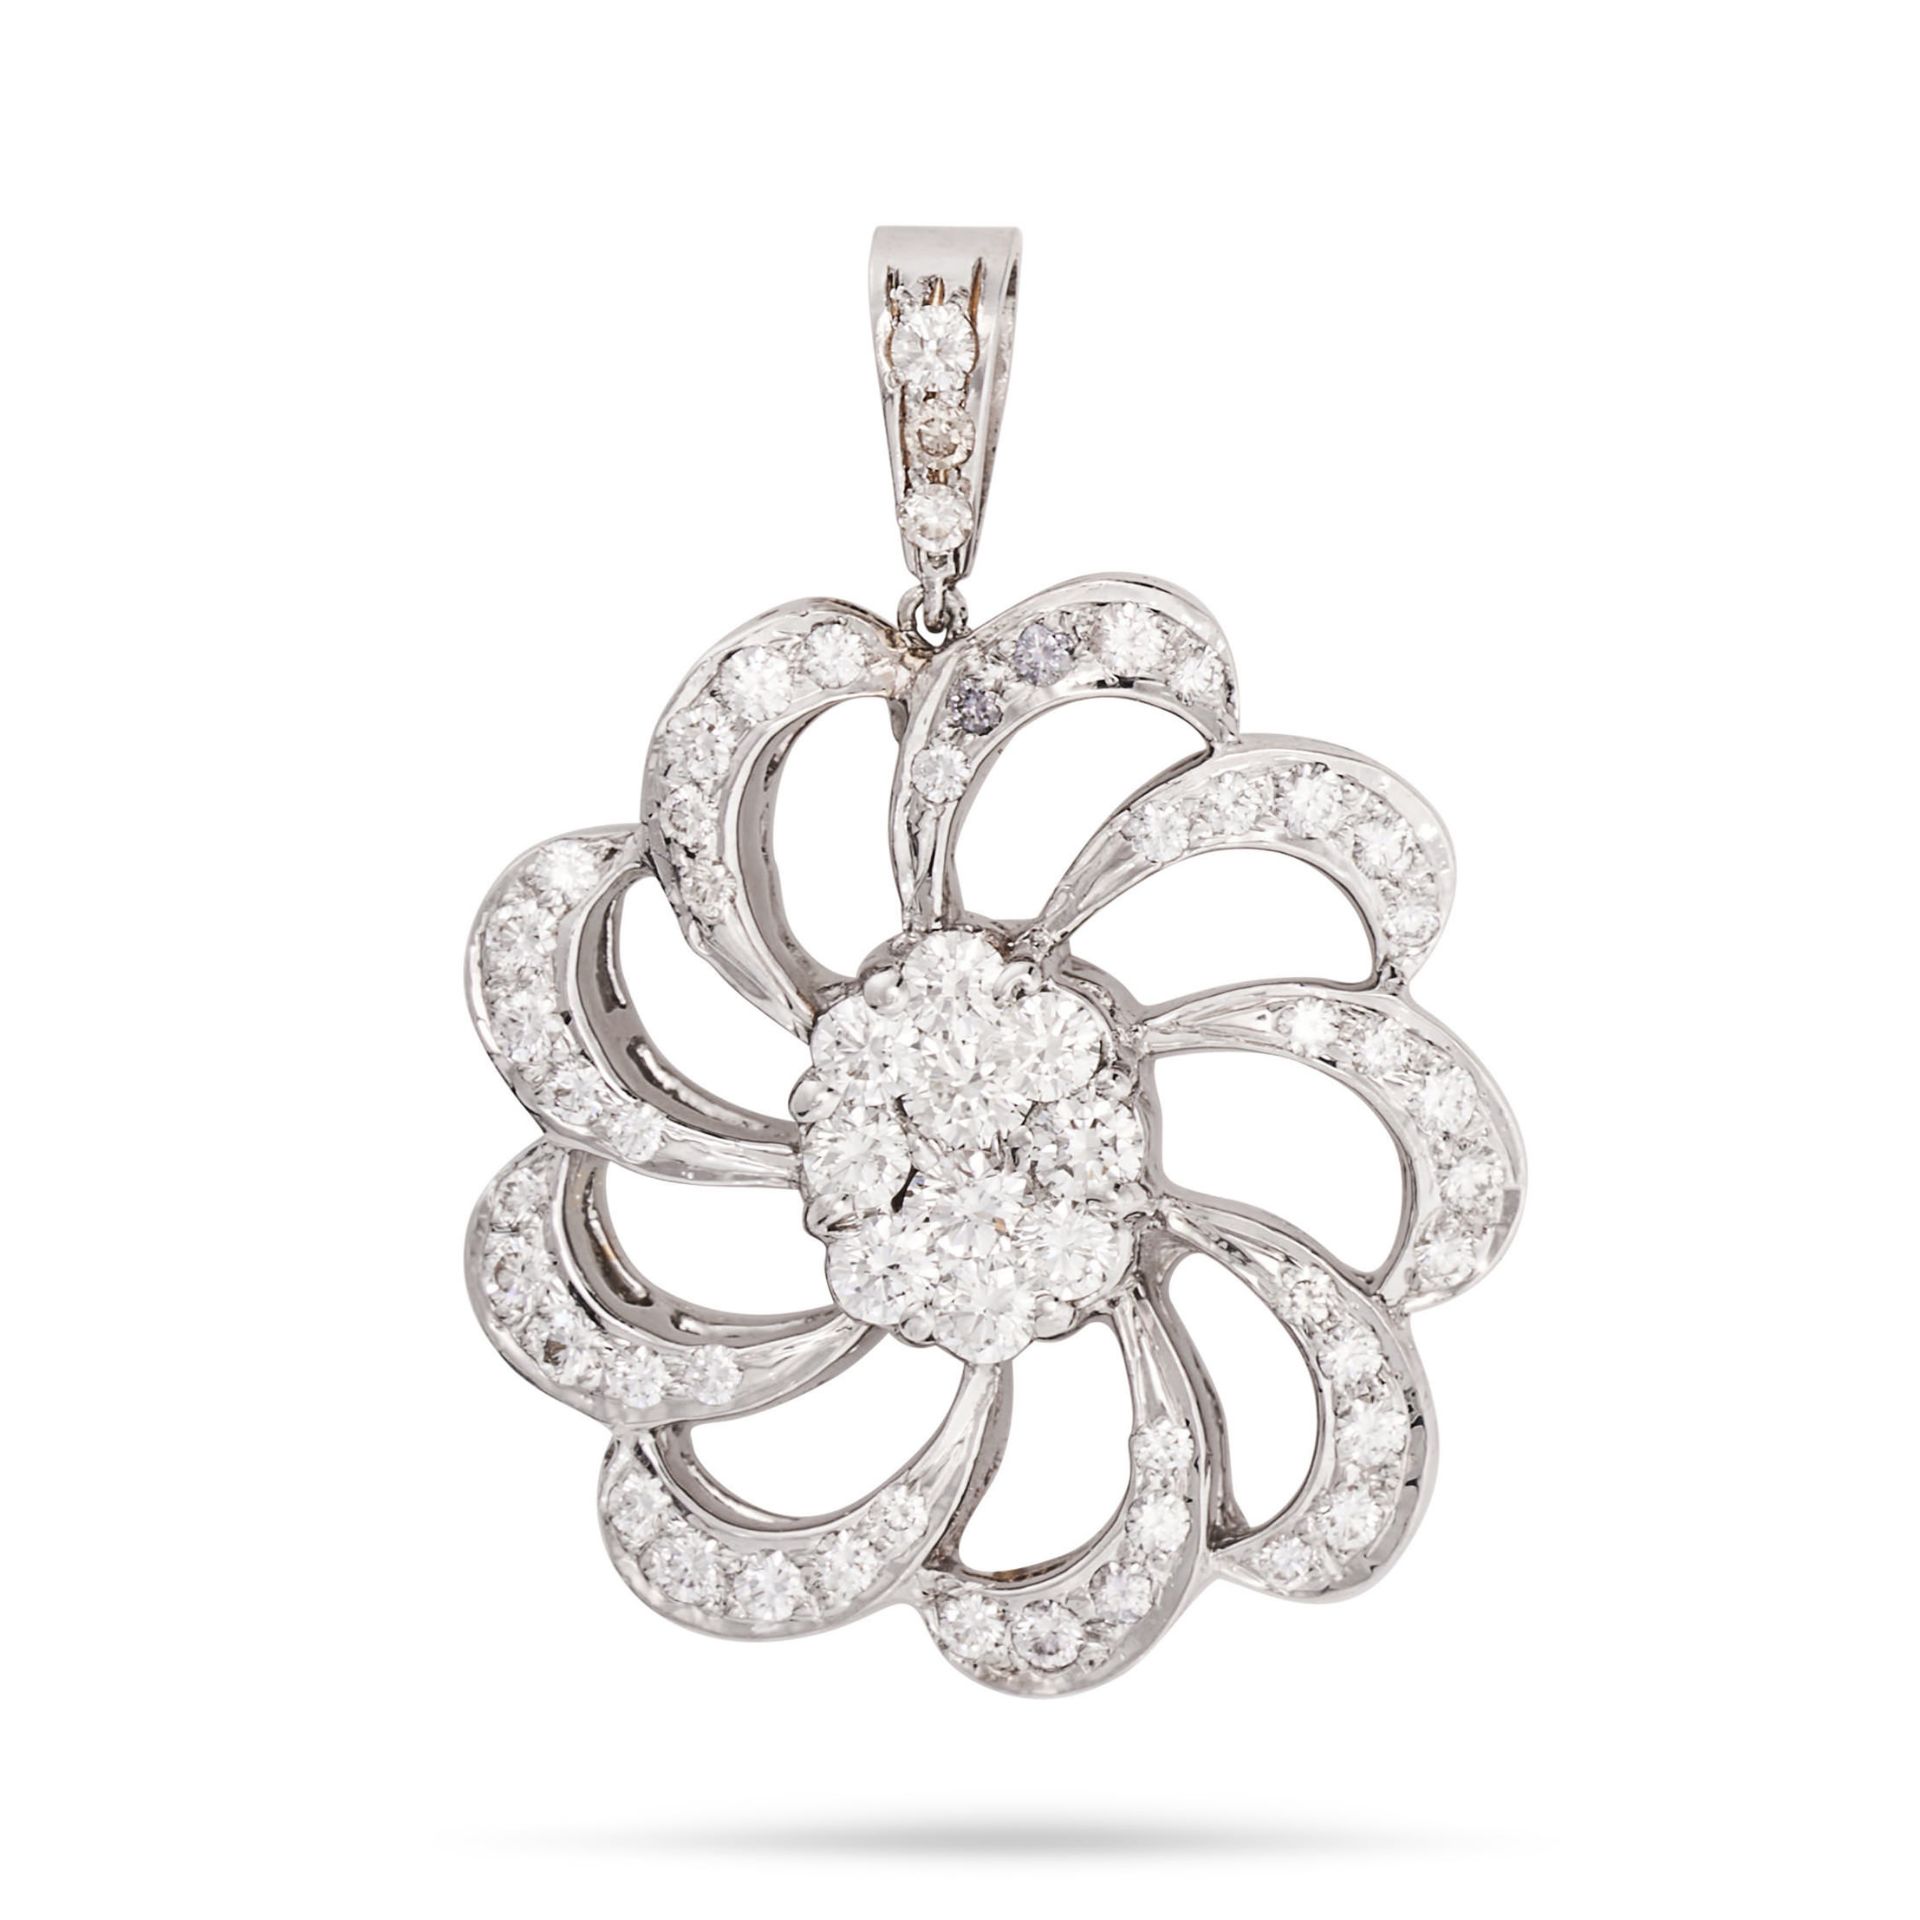 A DIAMOND PENDANT set with a cluster of round brilliant cut diamonds accented by a stylised borde...